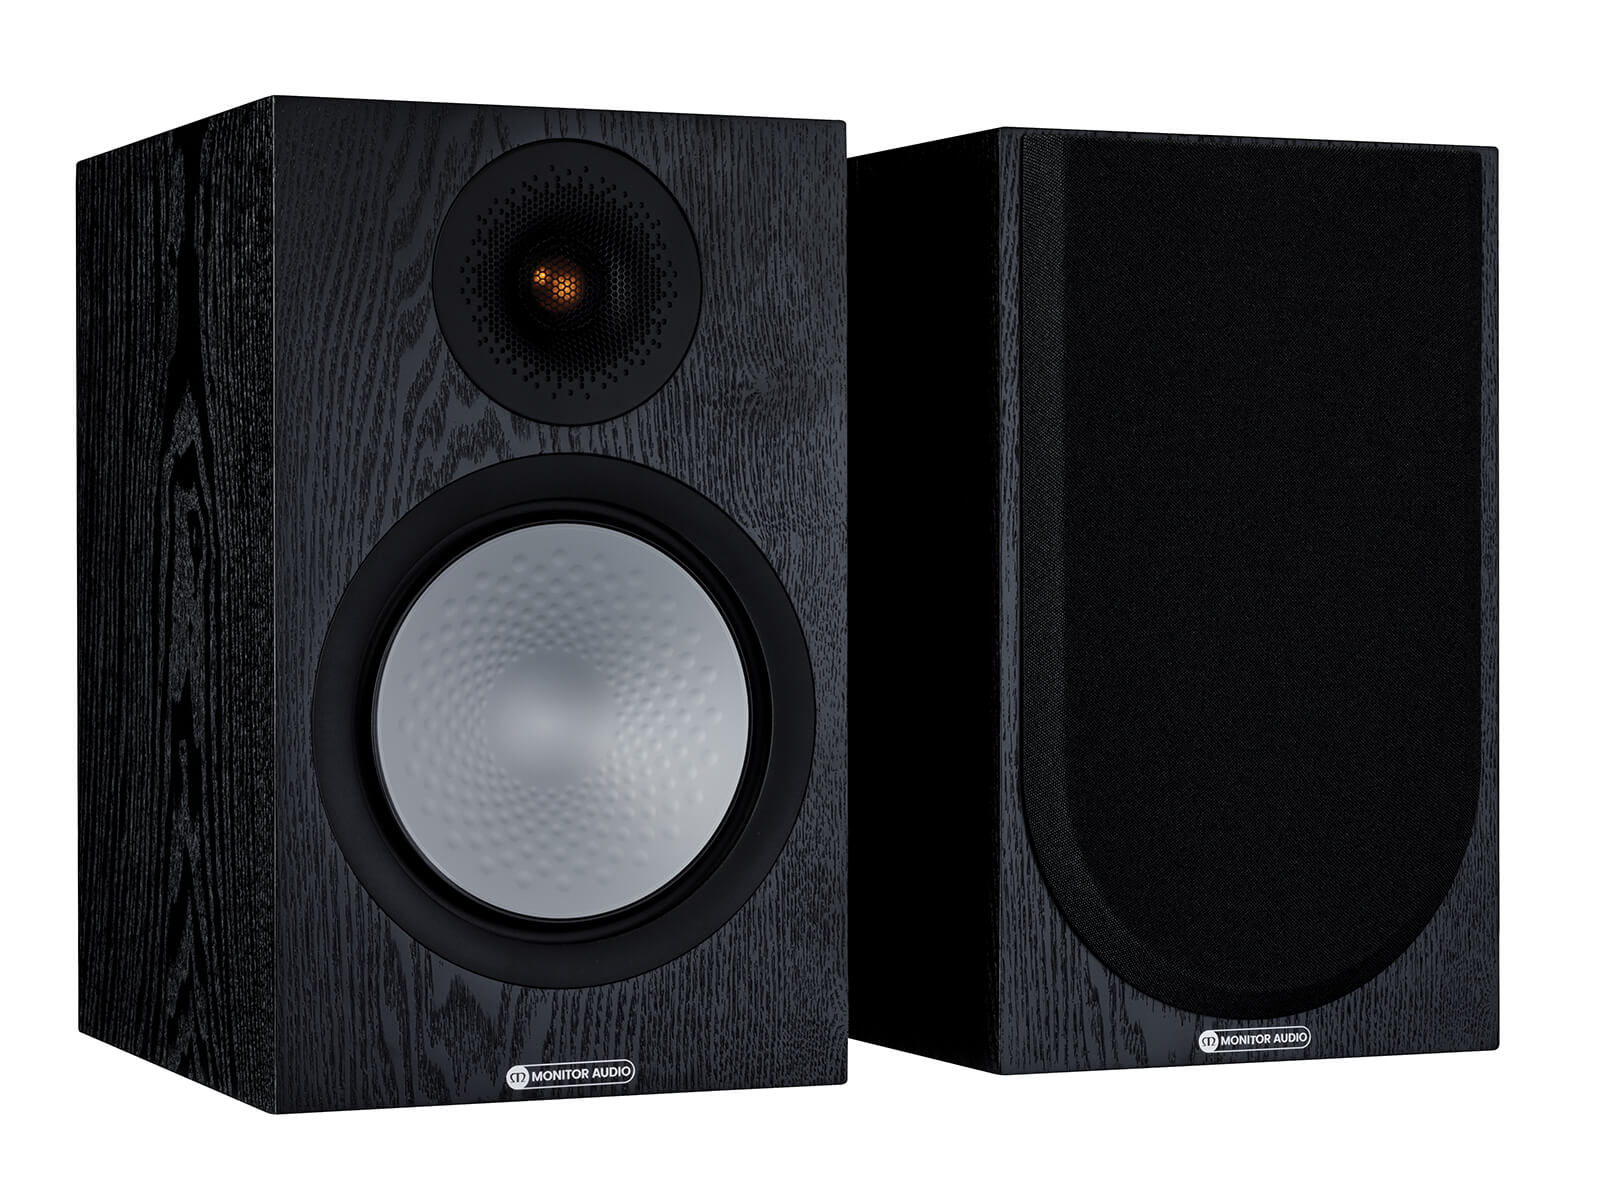 A pair of Monitor Audio's Silver 100 7G, in a black oak finish, iso view, with and without grilles.